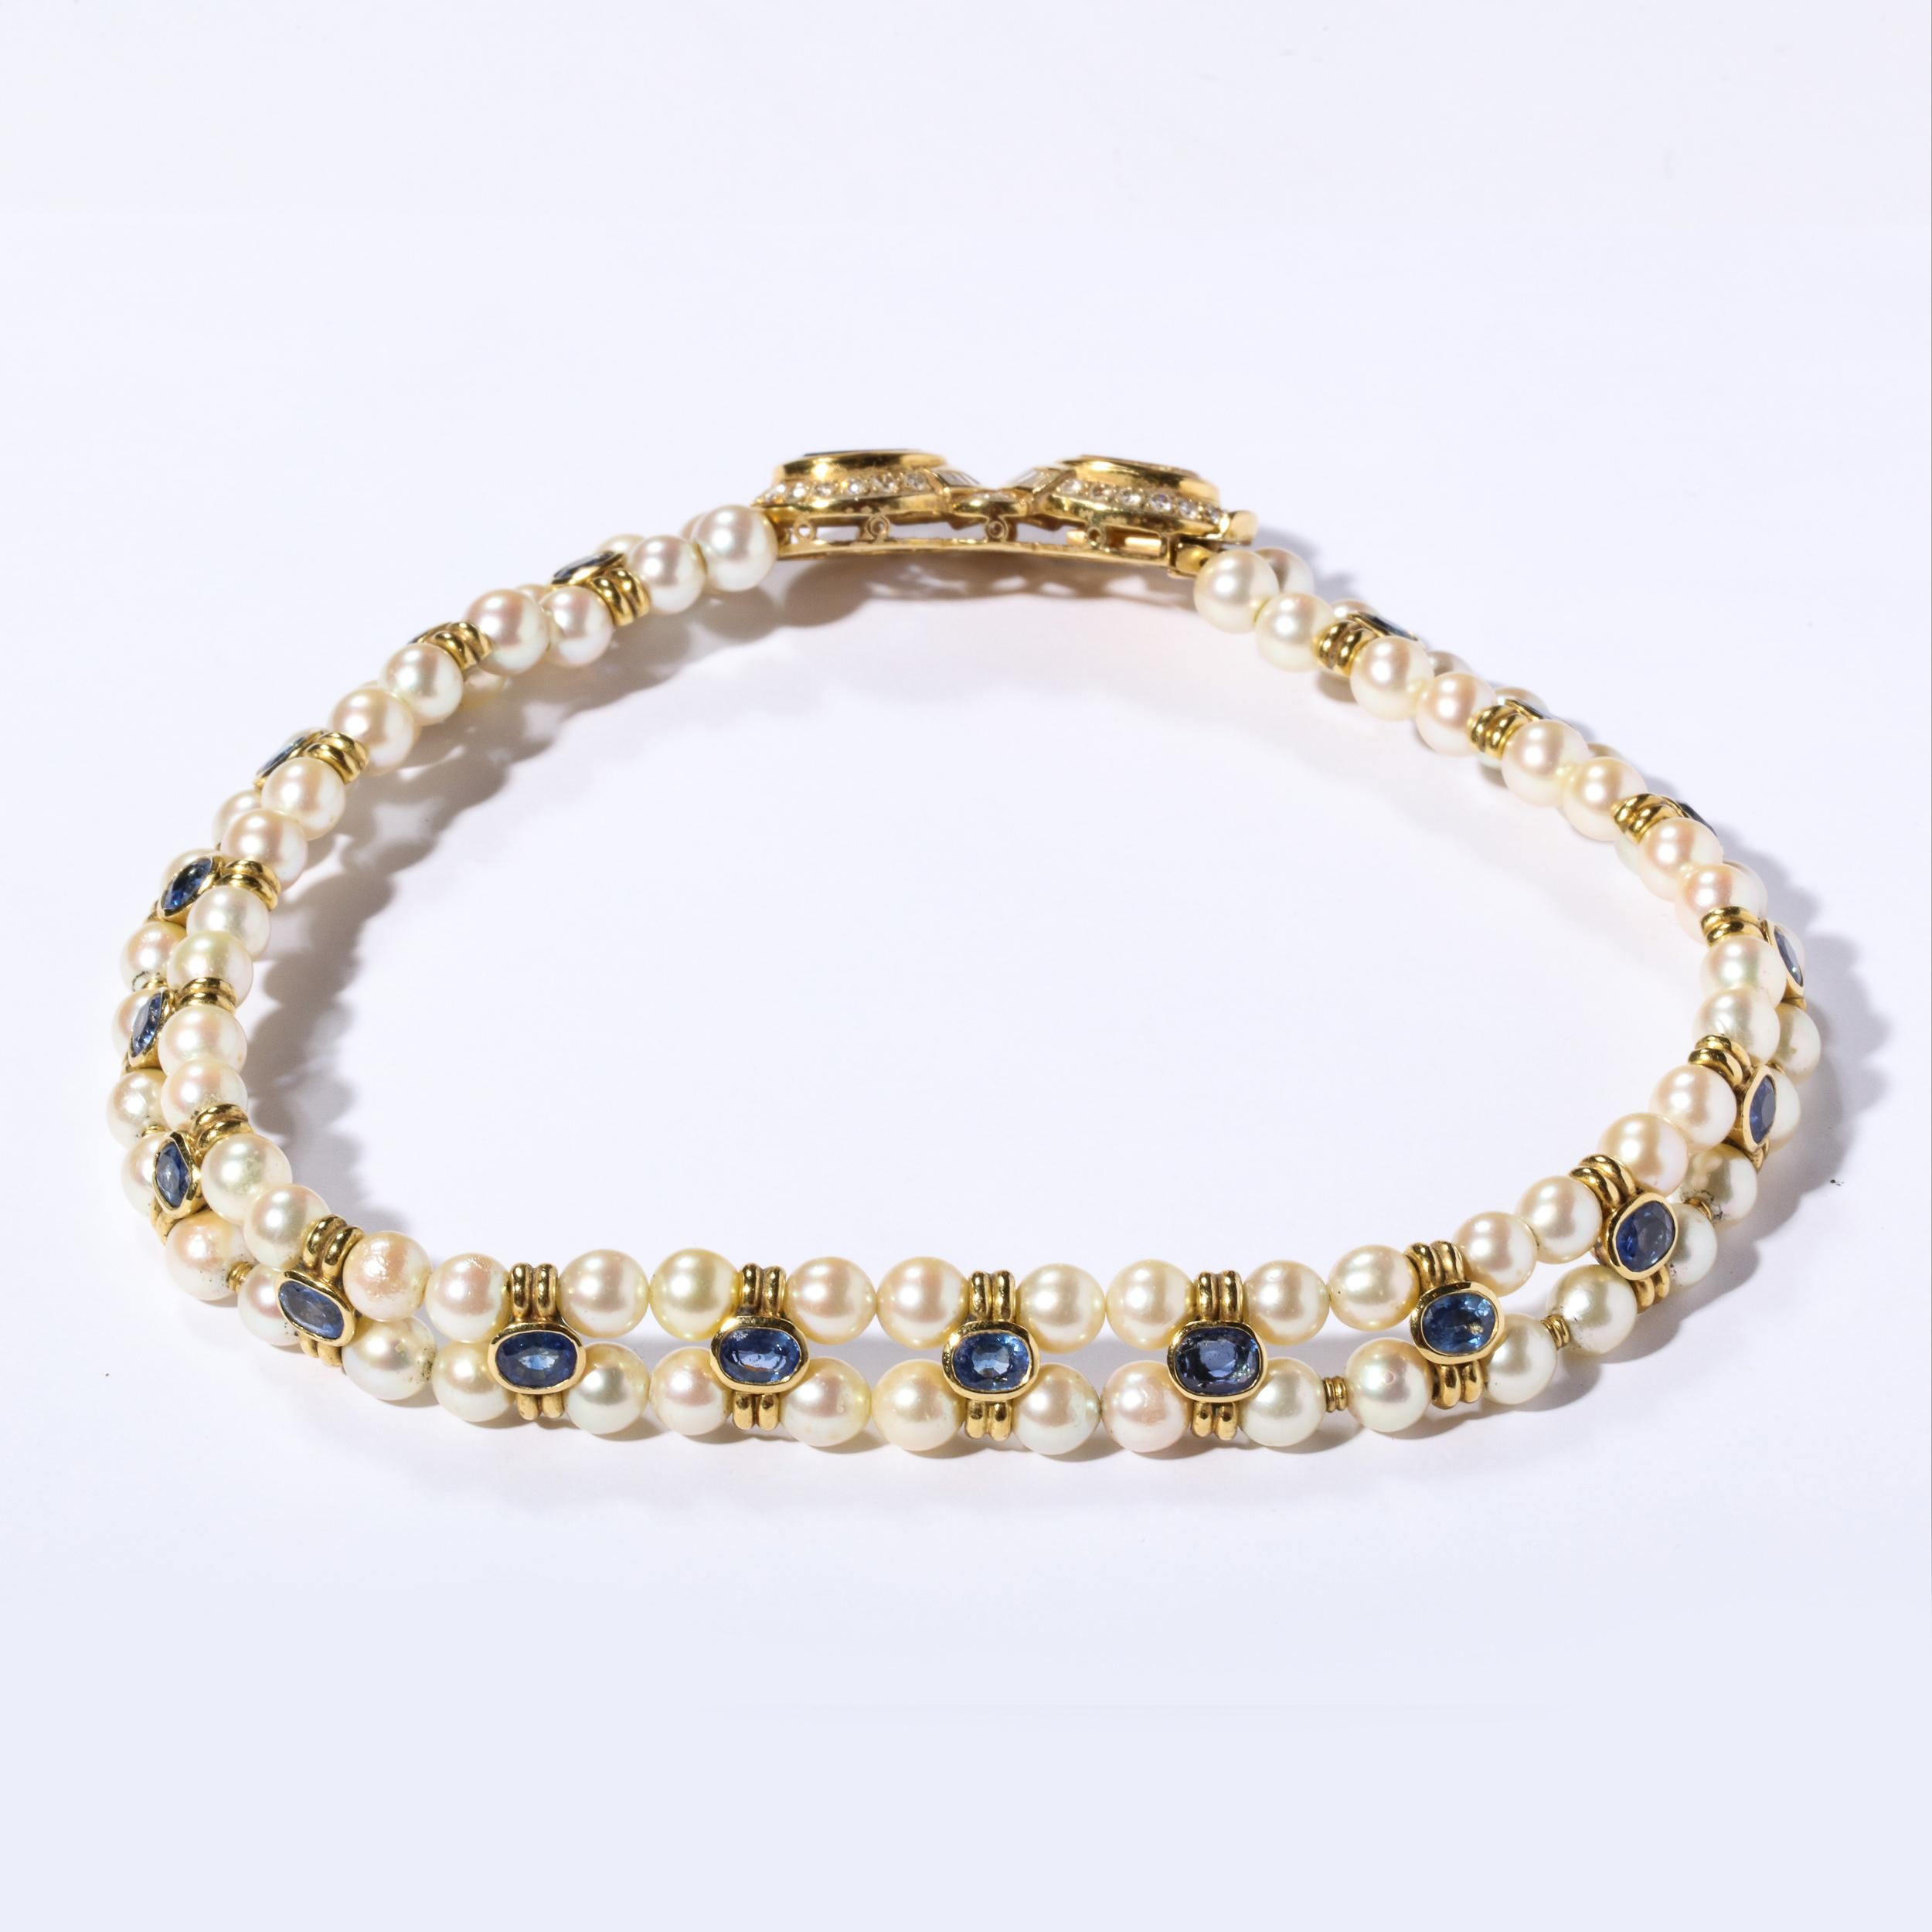 Double Strand Pearl Necklace  with Carved Citrine & Iolite, 18k and Diamonds  Damen im Angebot